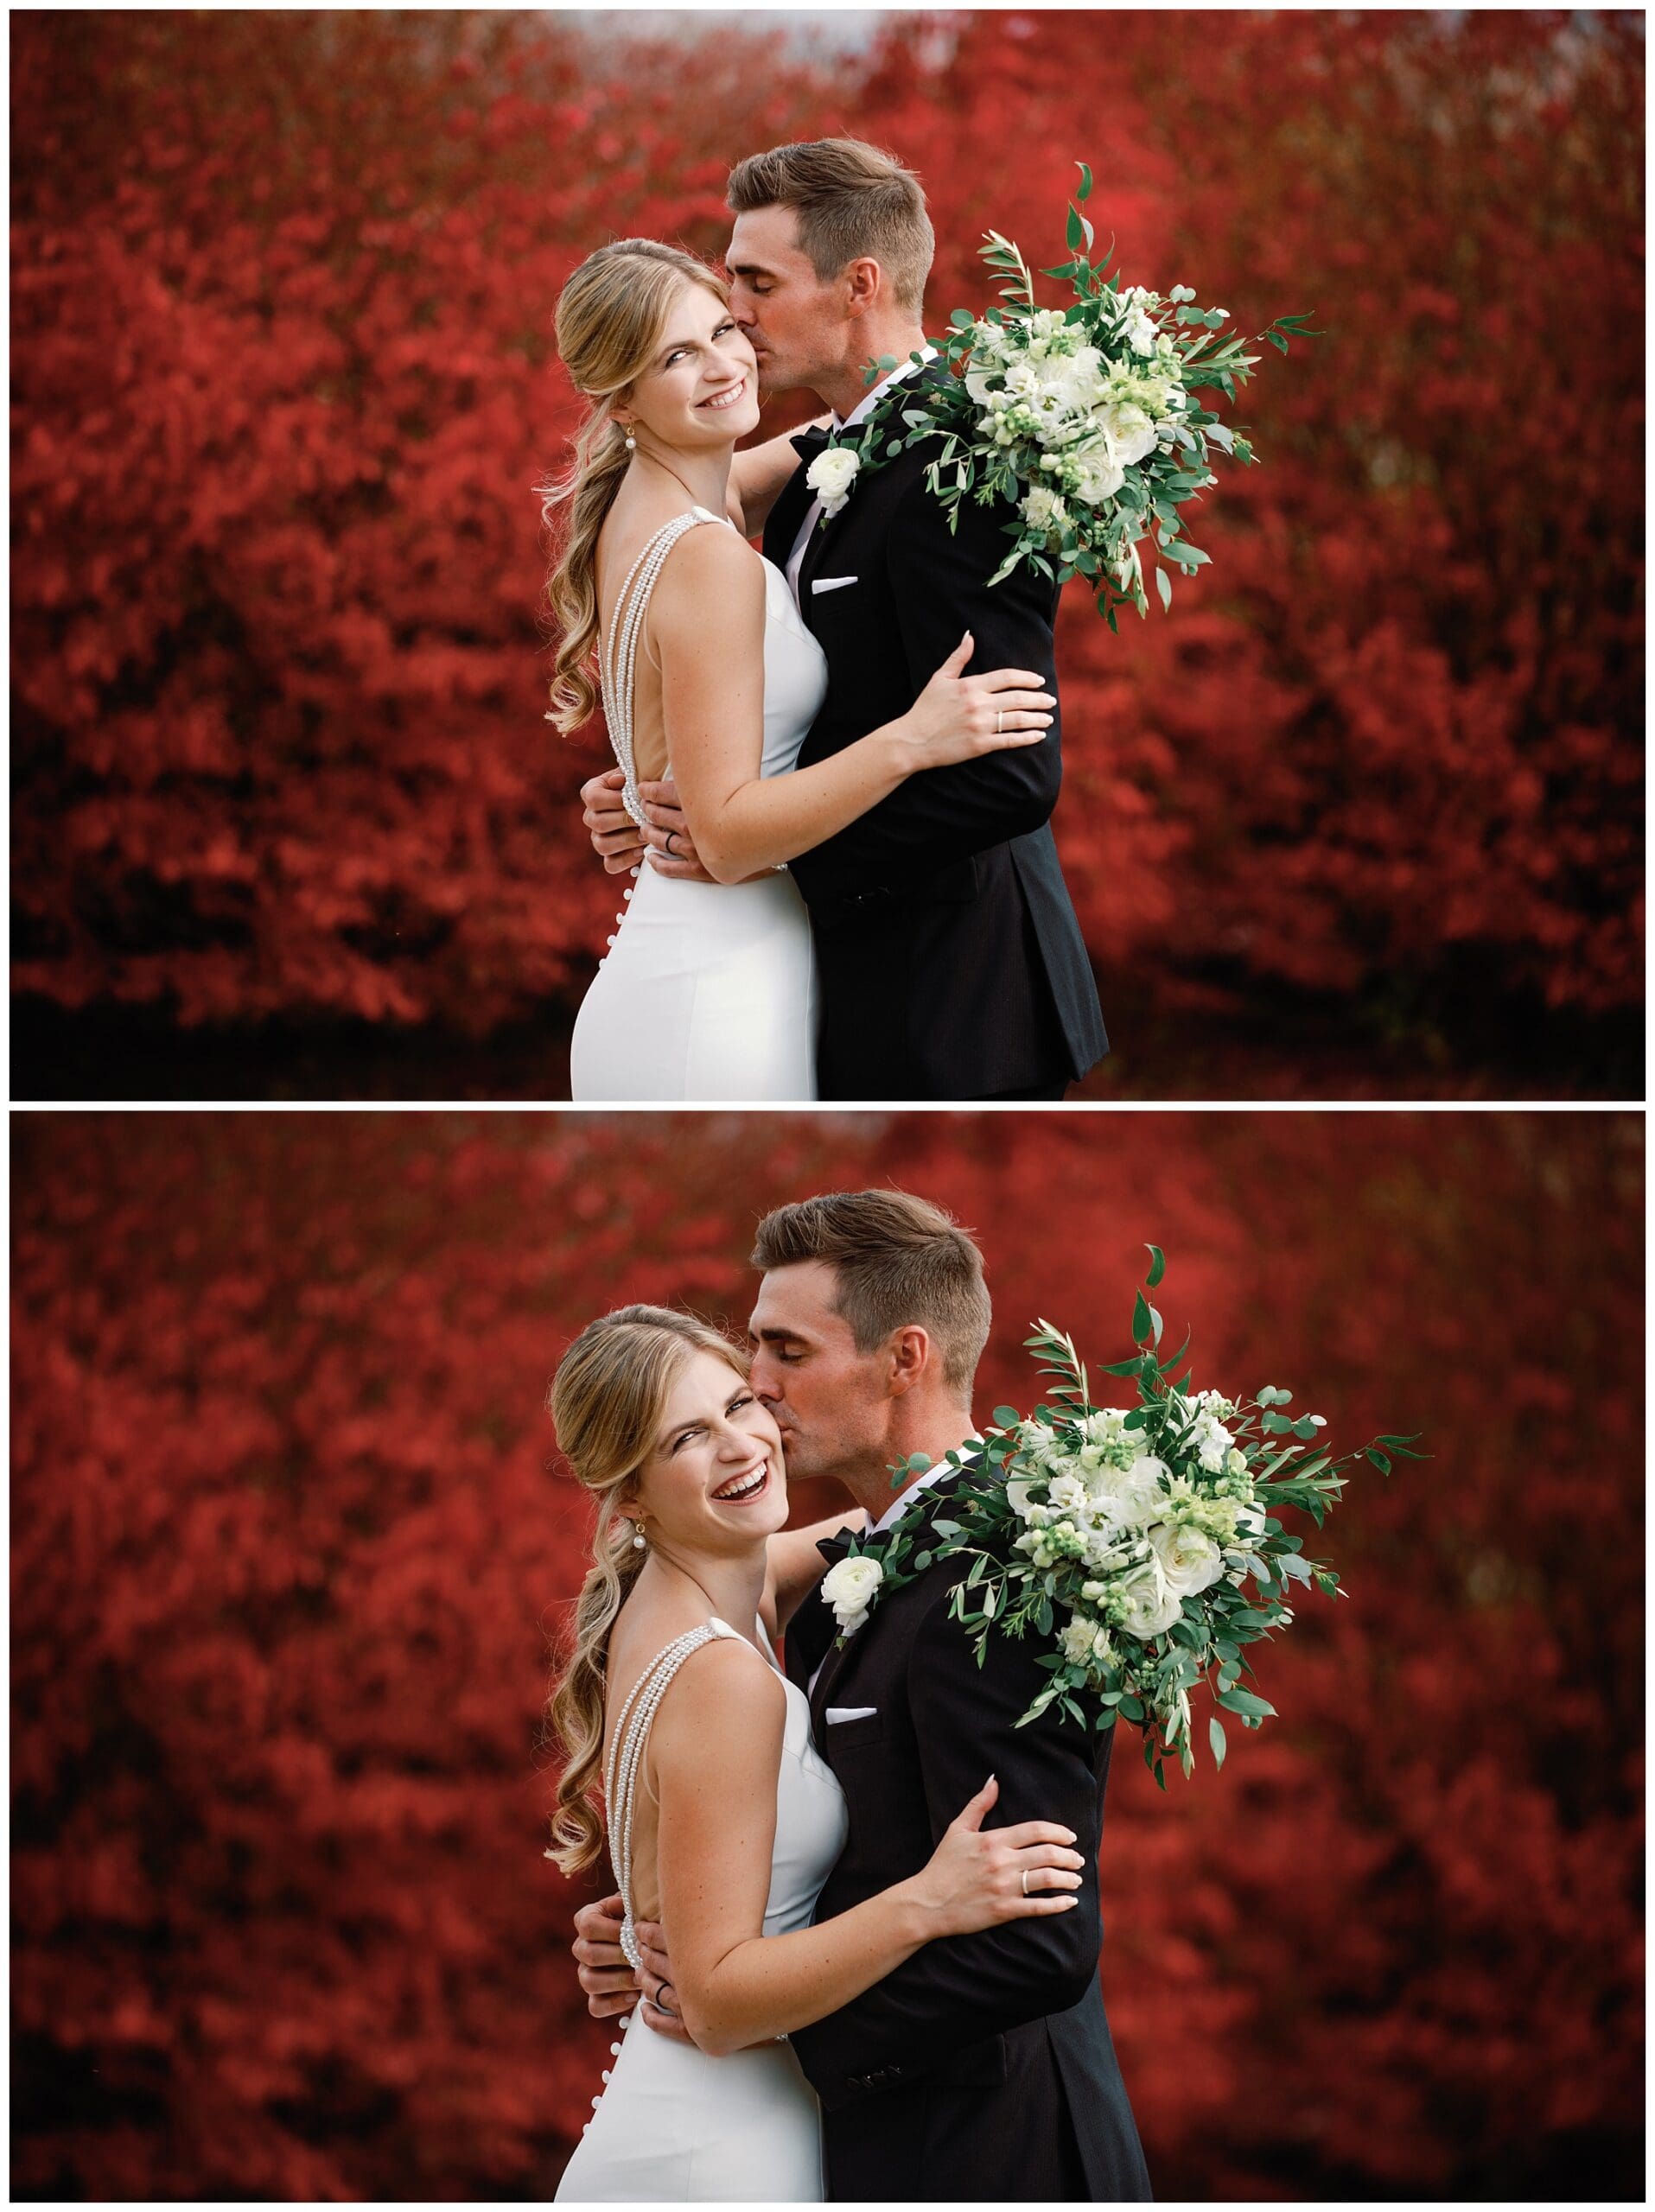 A bride and groom embracing in front of a vibrant red tree at their fall wedding at Crest Center.